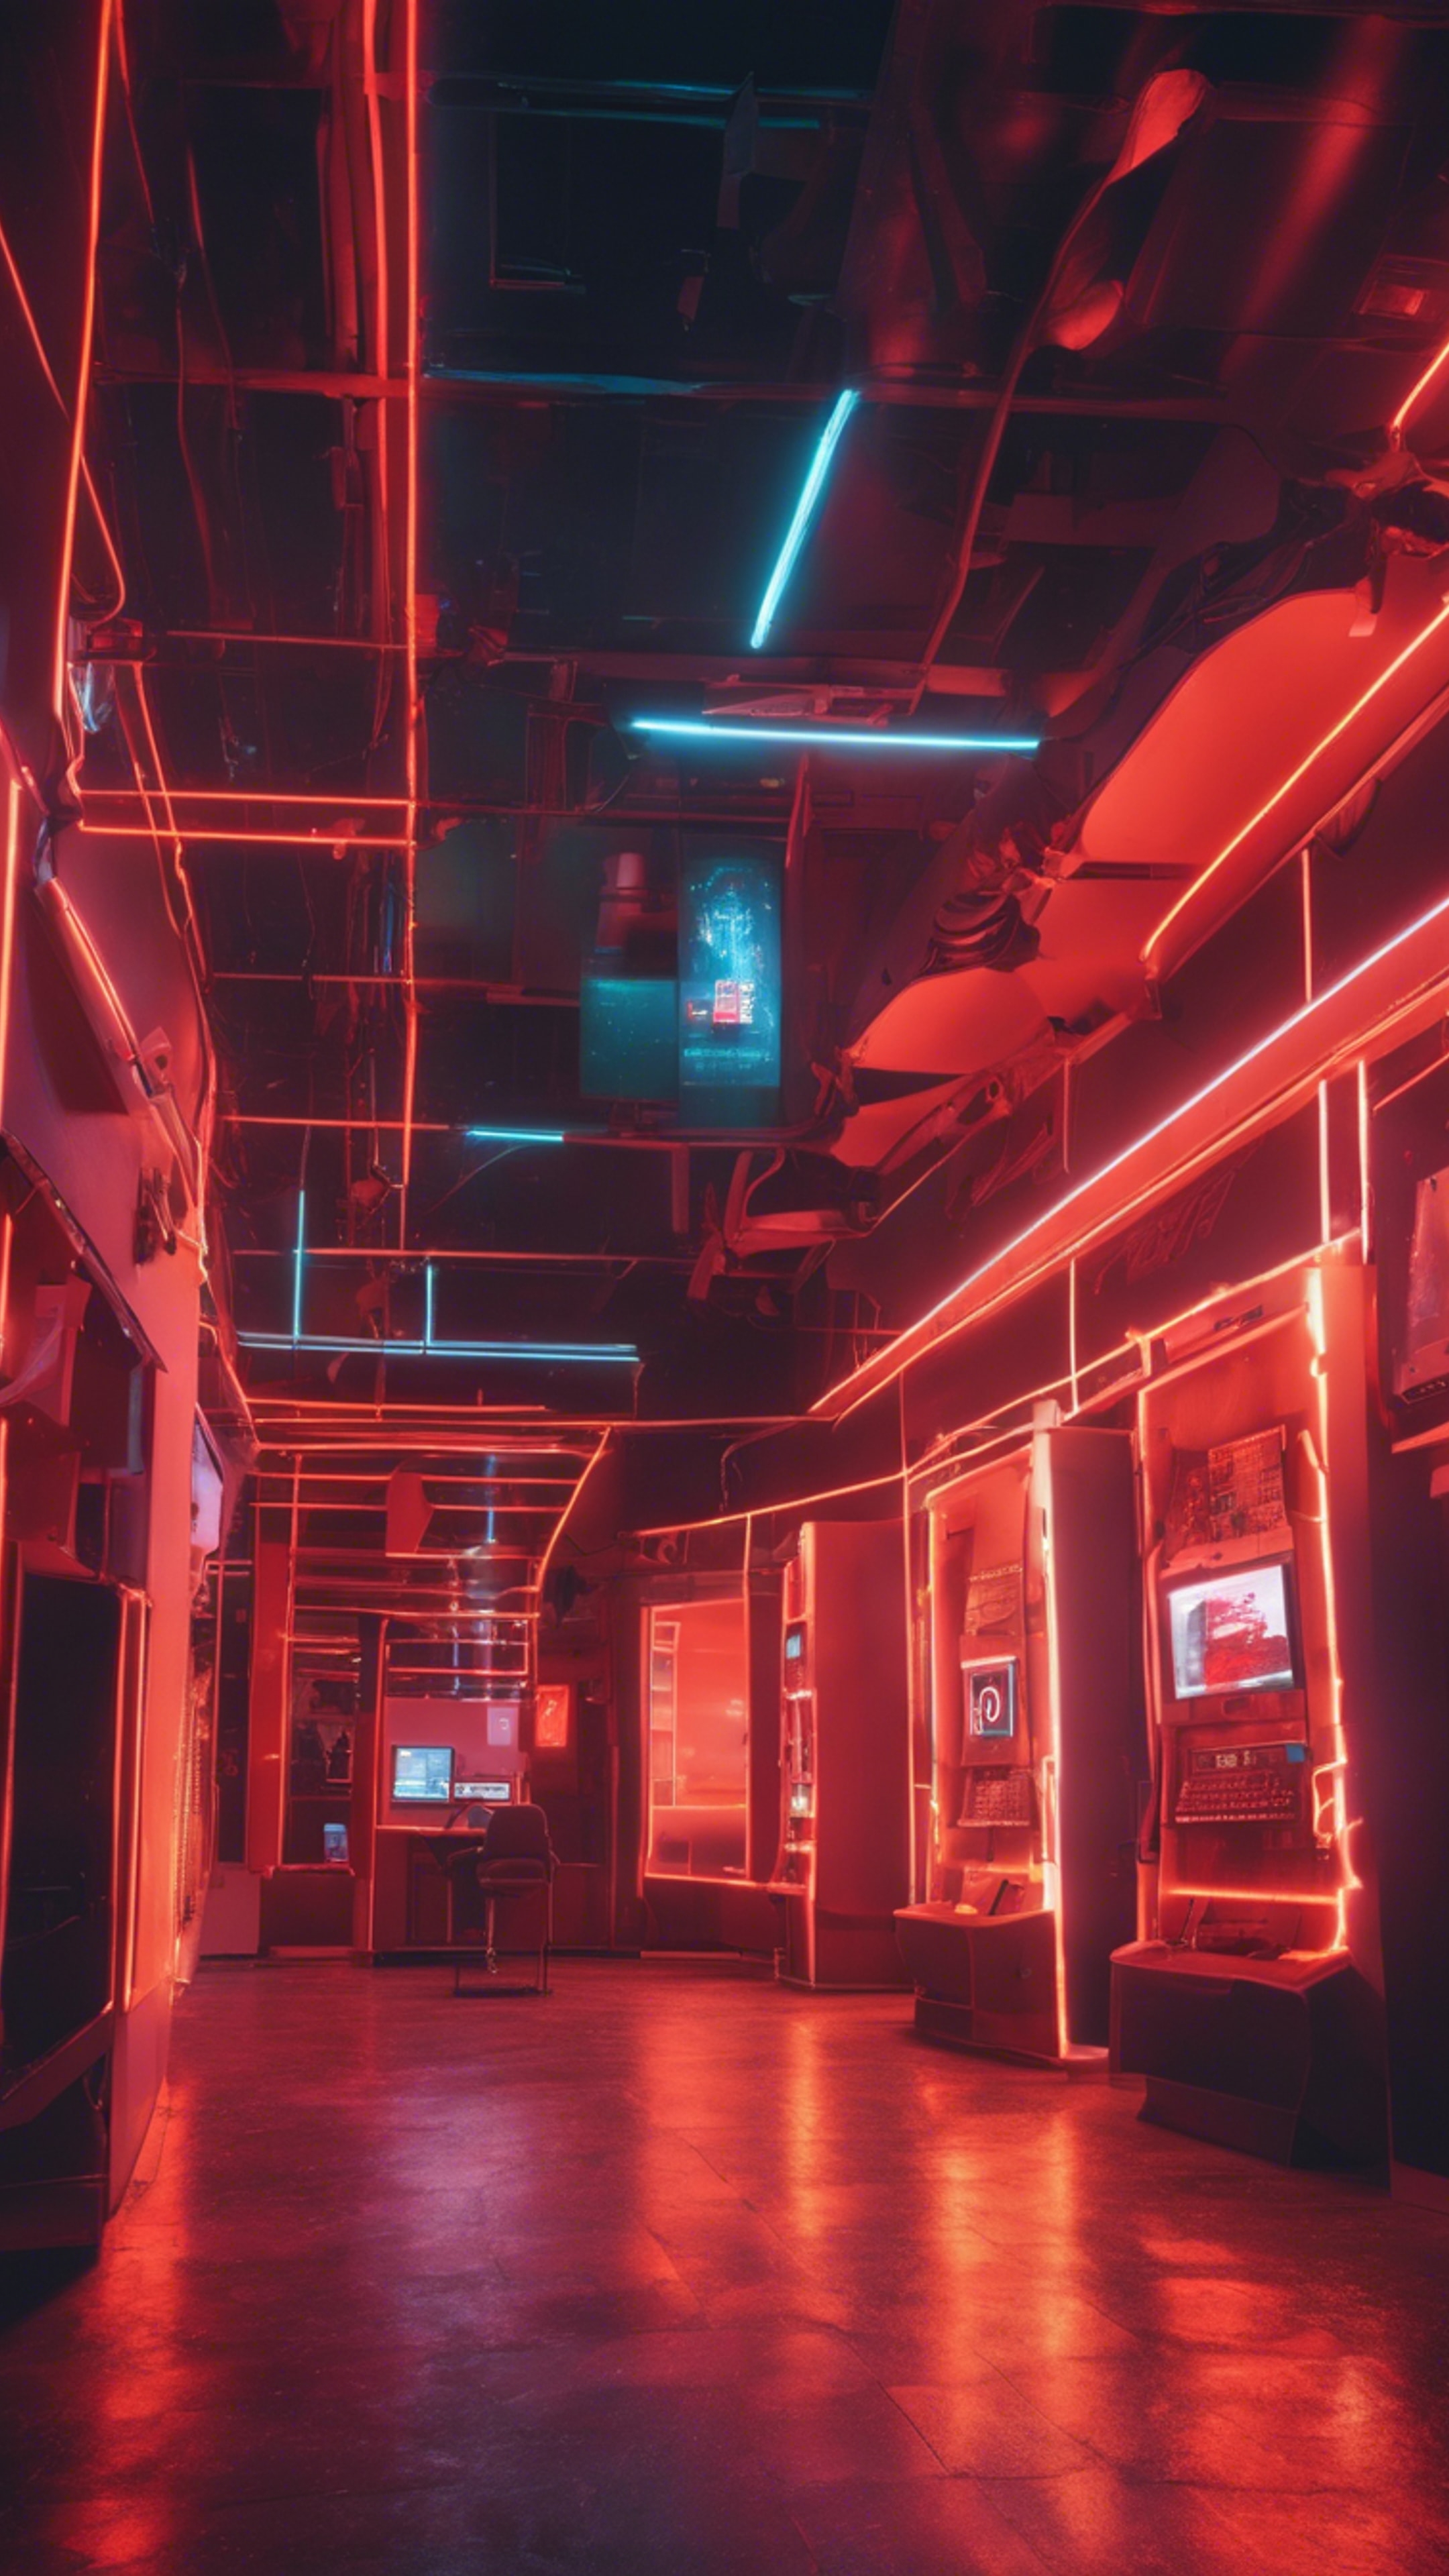 An architecturally unique cyber cafe glowing with neon red and orange lights at night. Шпалери[37c23e18da0f466d9ff8]